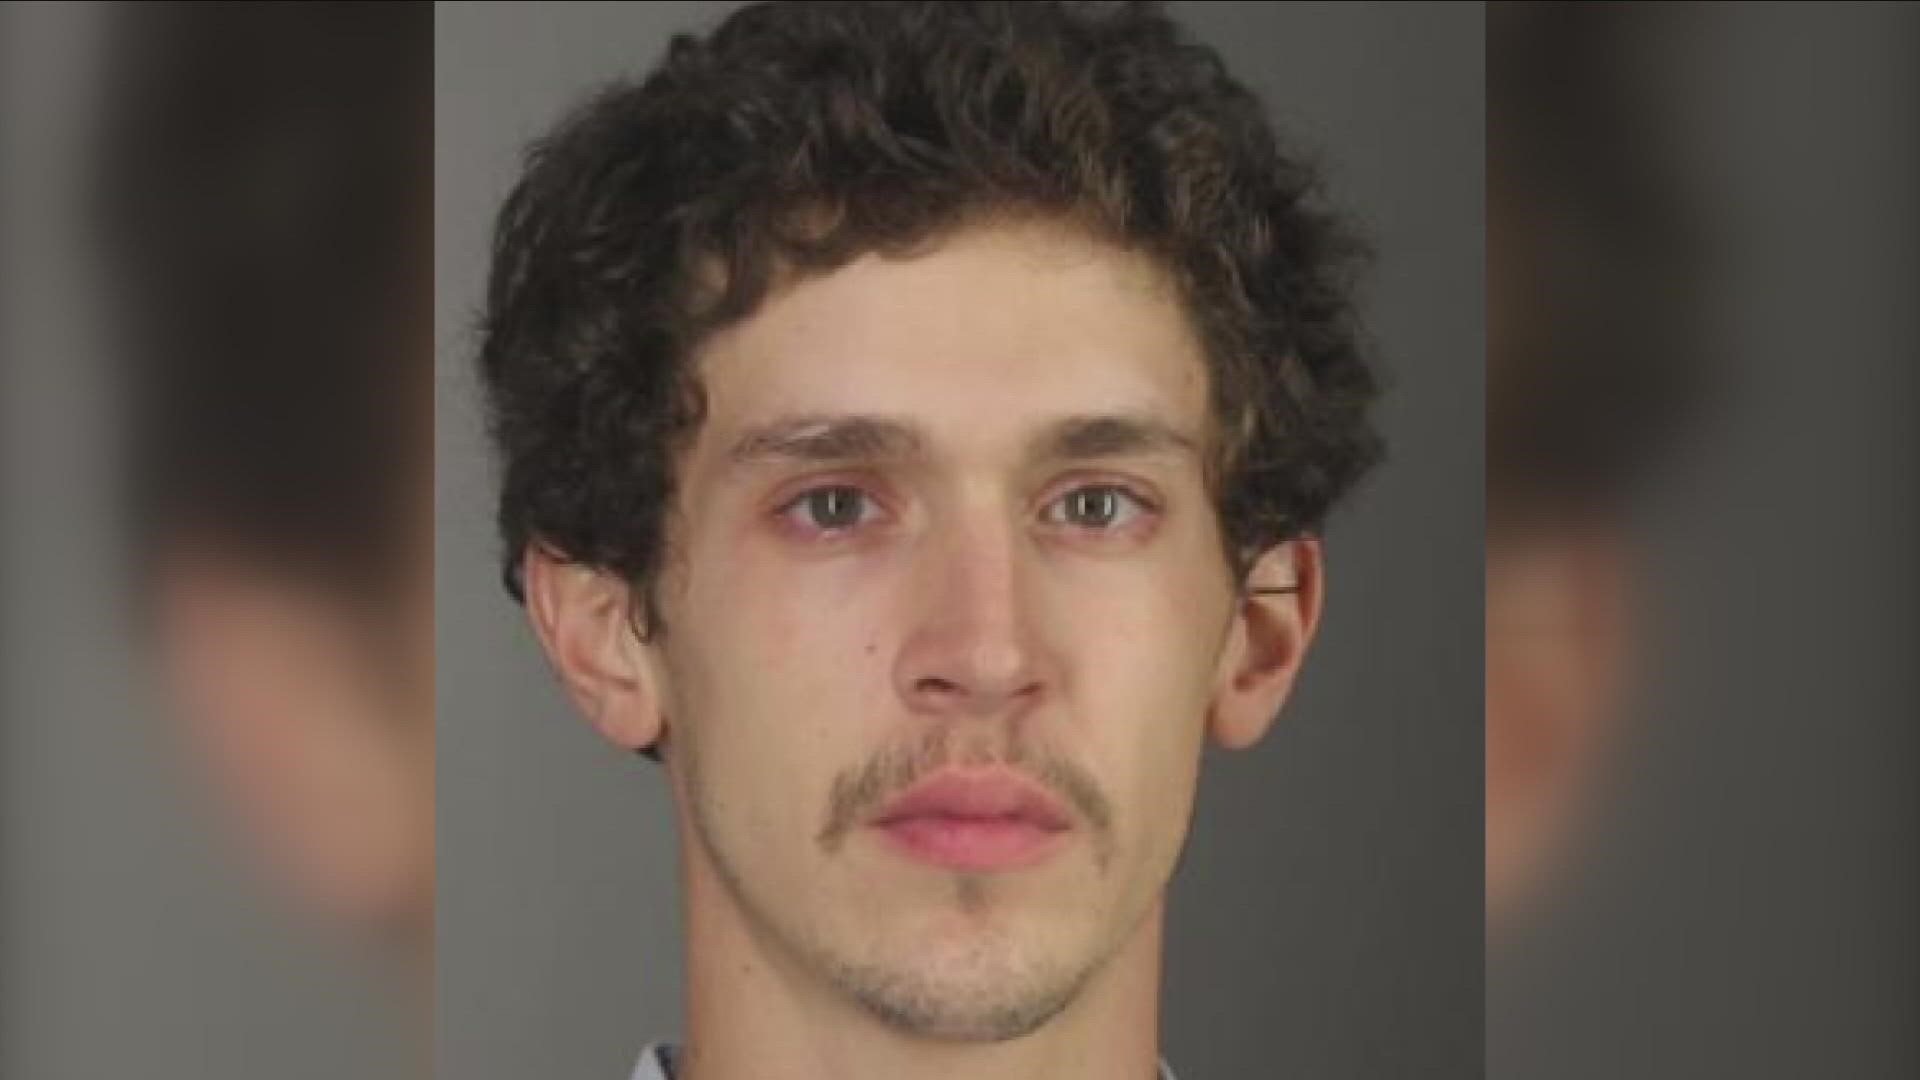 26-year-old Jarrod Dillman got the sentence today from State Supreme Court Justice William Boller... after admitting to an animal cruelty charge in 2019.